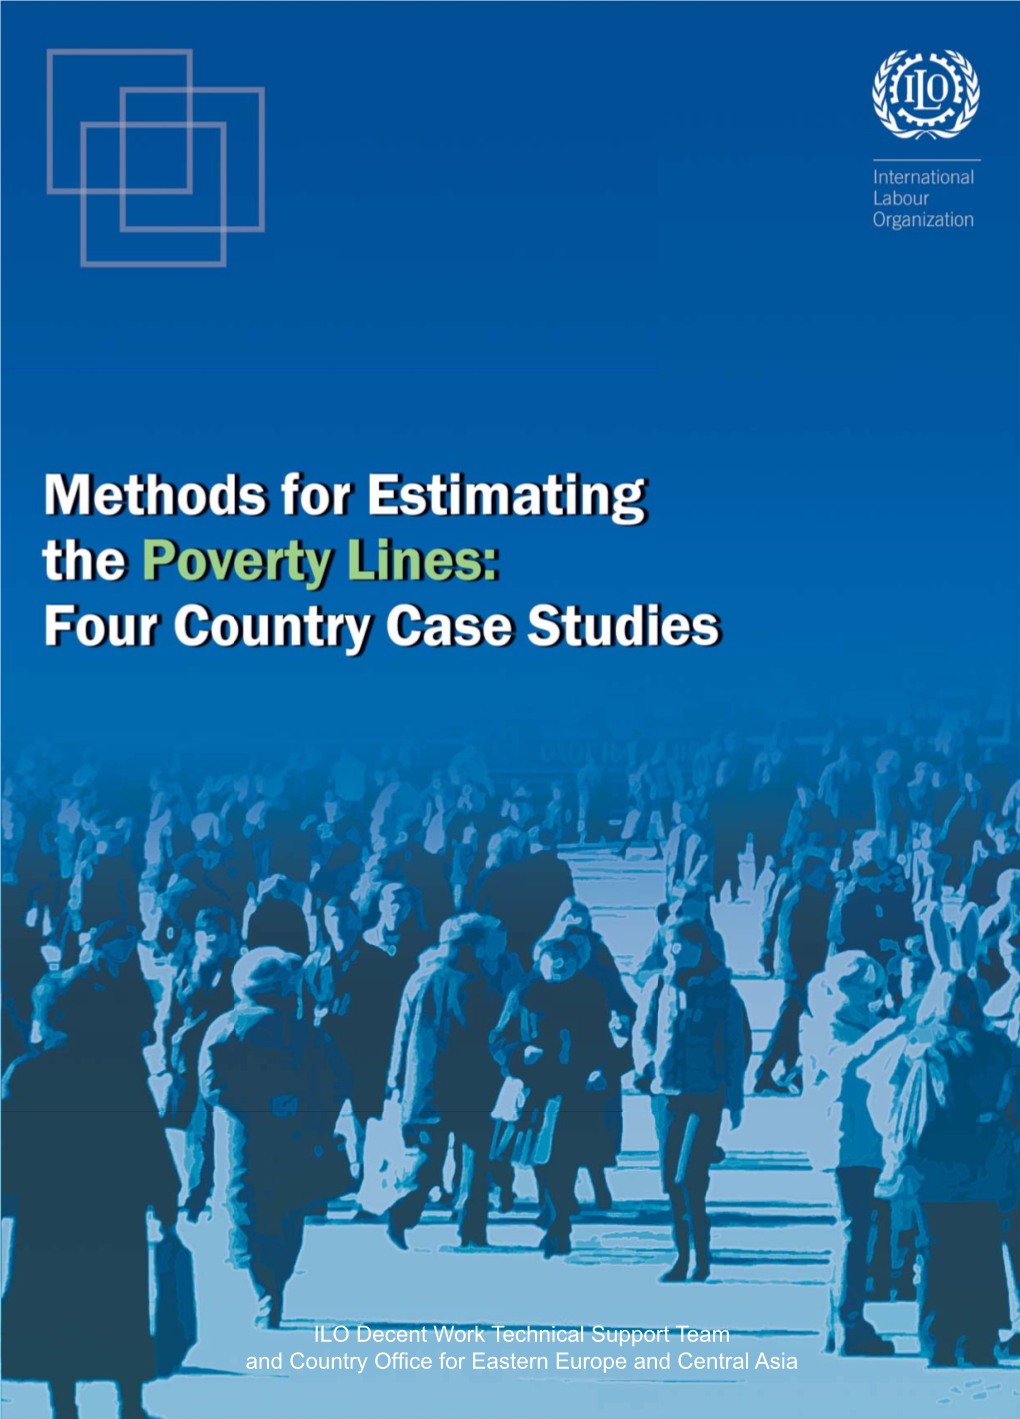 Methods for Estimating the Poverty Lines: Four Country Case Studies